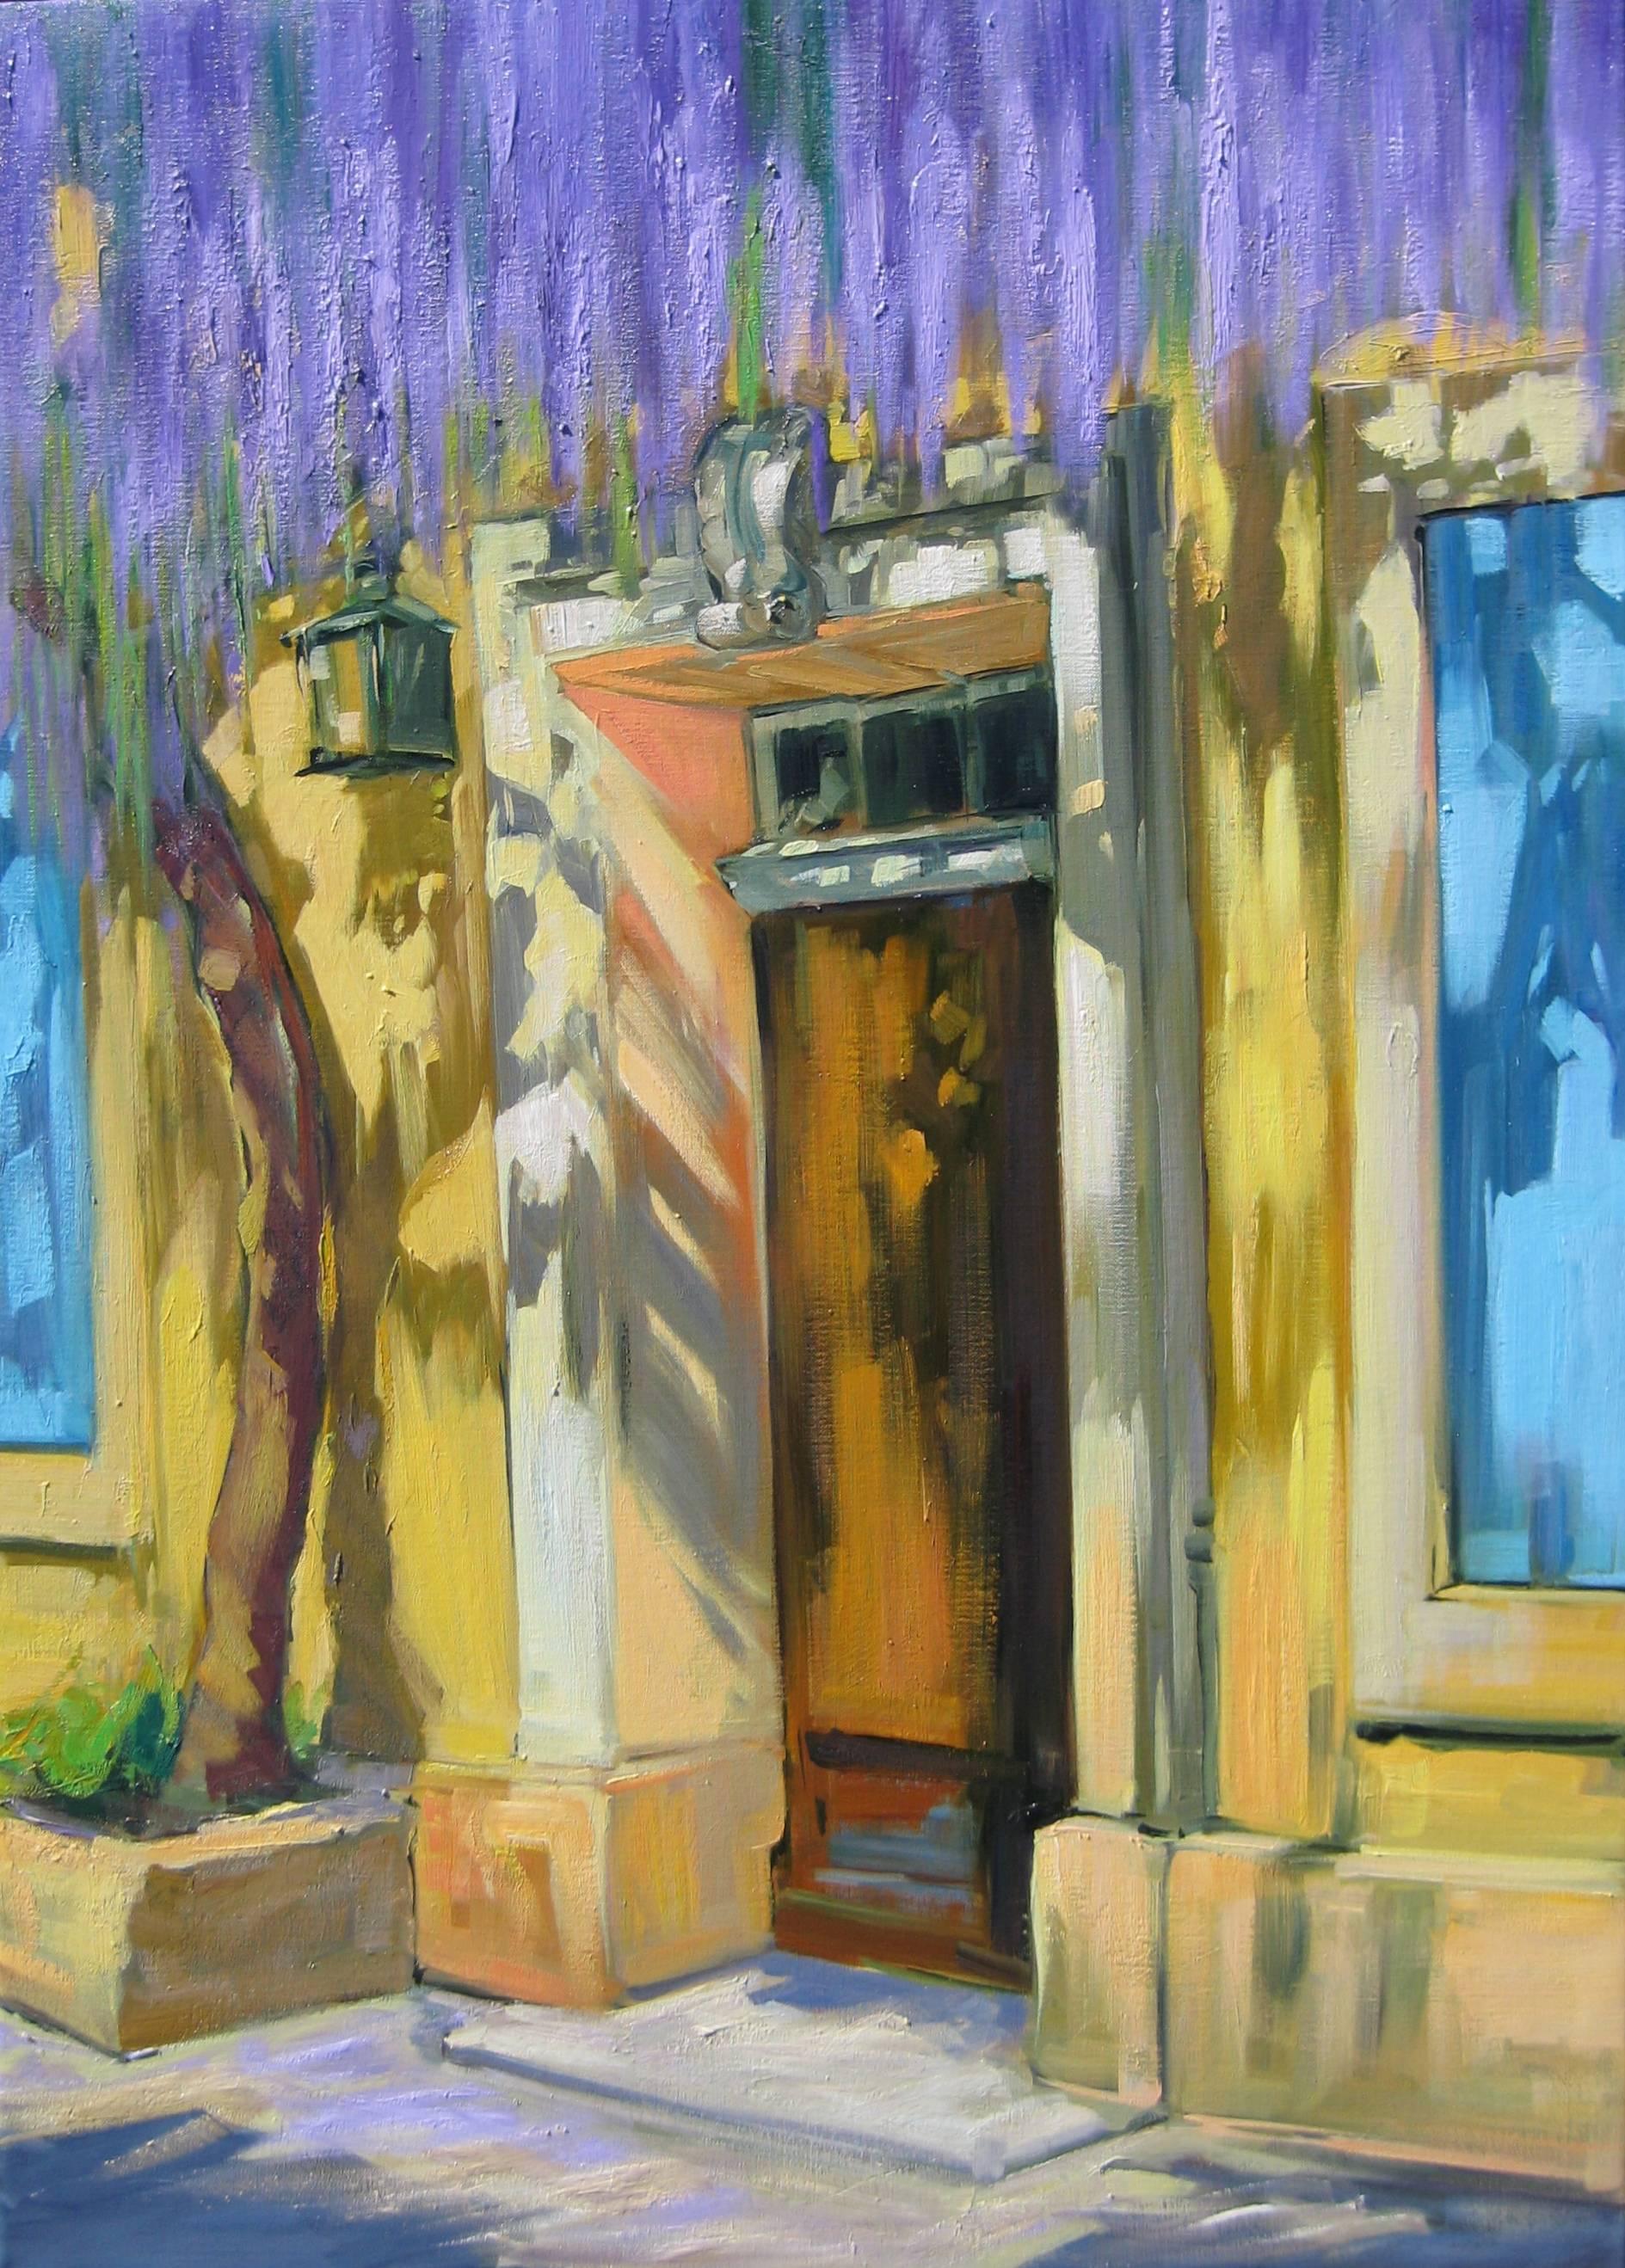 Maria Bertrán Landscape Painting - "Cascading Wisteria Over The Doorway" Impressionist Oil by Maria Bertran